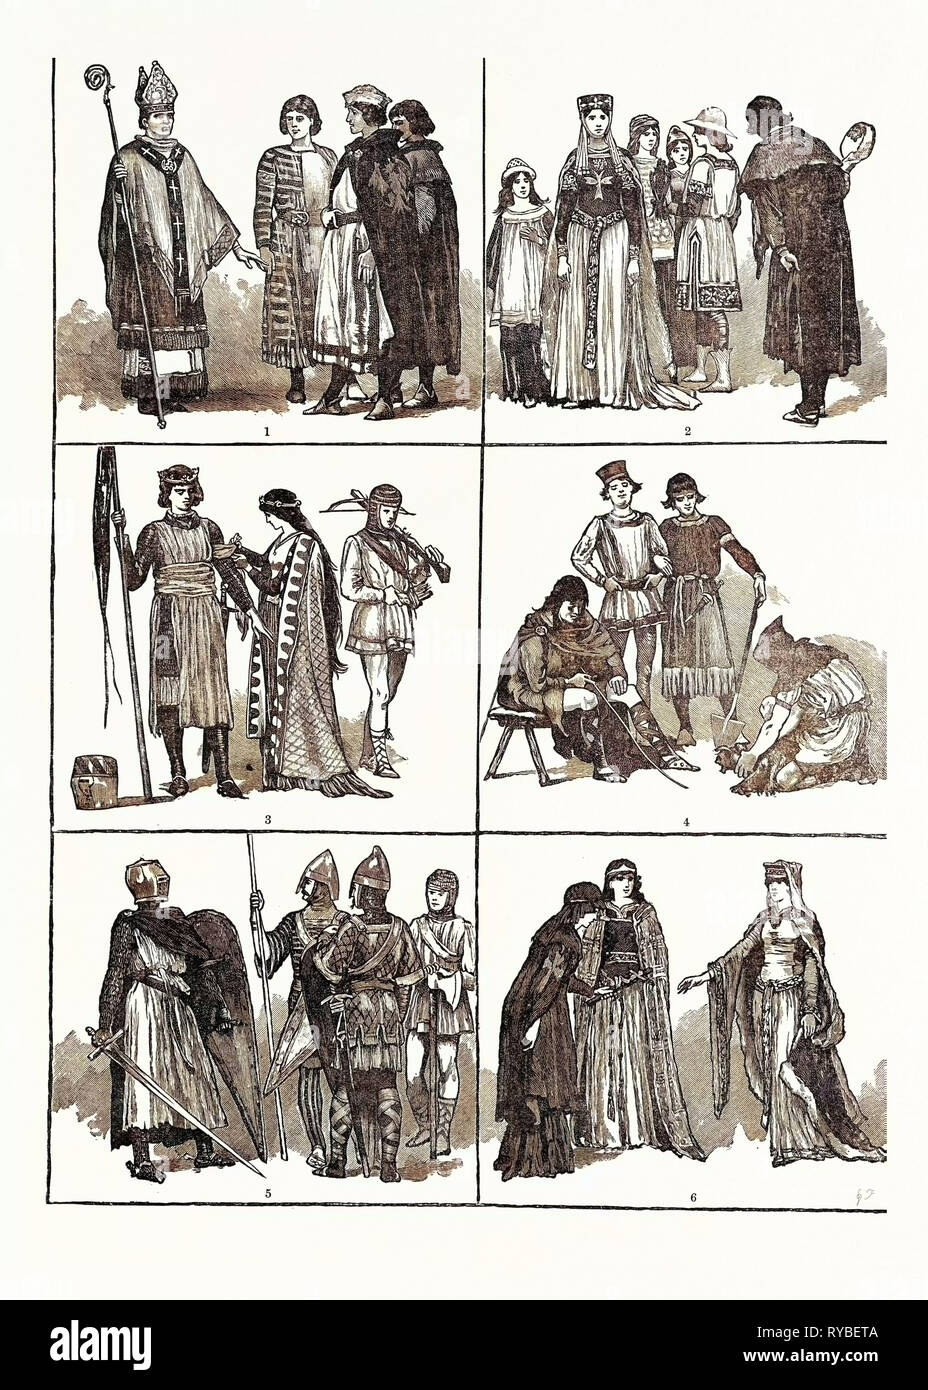 Norman Costumes of the Eleventh and Twelfth Centuries: 1. Bishops and Barons (11th Century) 2. Noble Ladies and Citizens (11th Century) 3. Prince Princess and Cross-Bowman (11th Century) 4. Artisans and Artificers (11th Century) 5. Military Costumes of the 12th Century 6. Noble Ladies of Normandy (12th Century Stock Photo